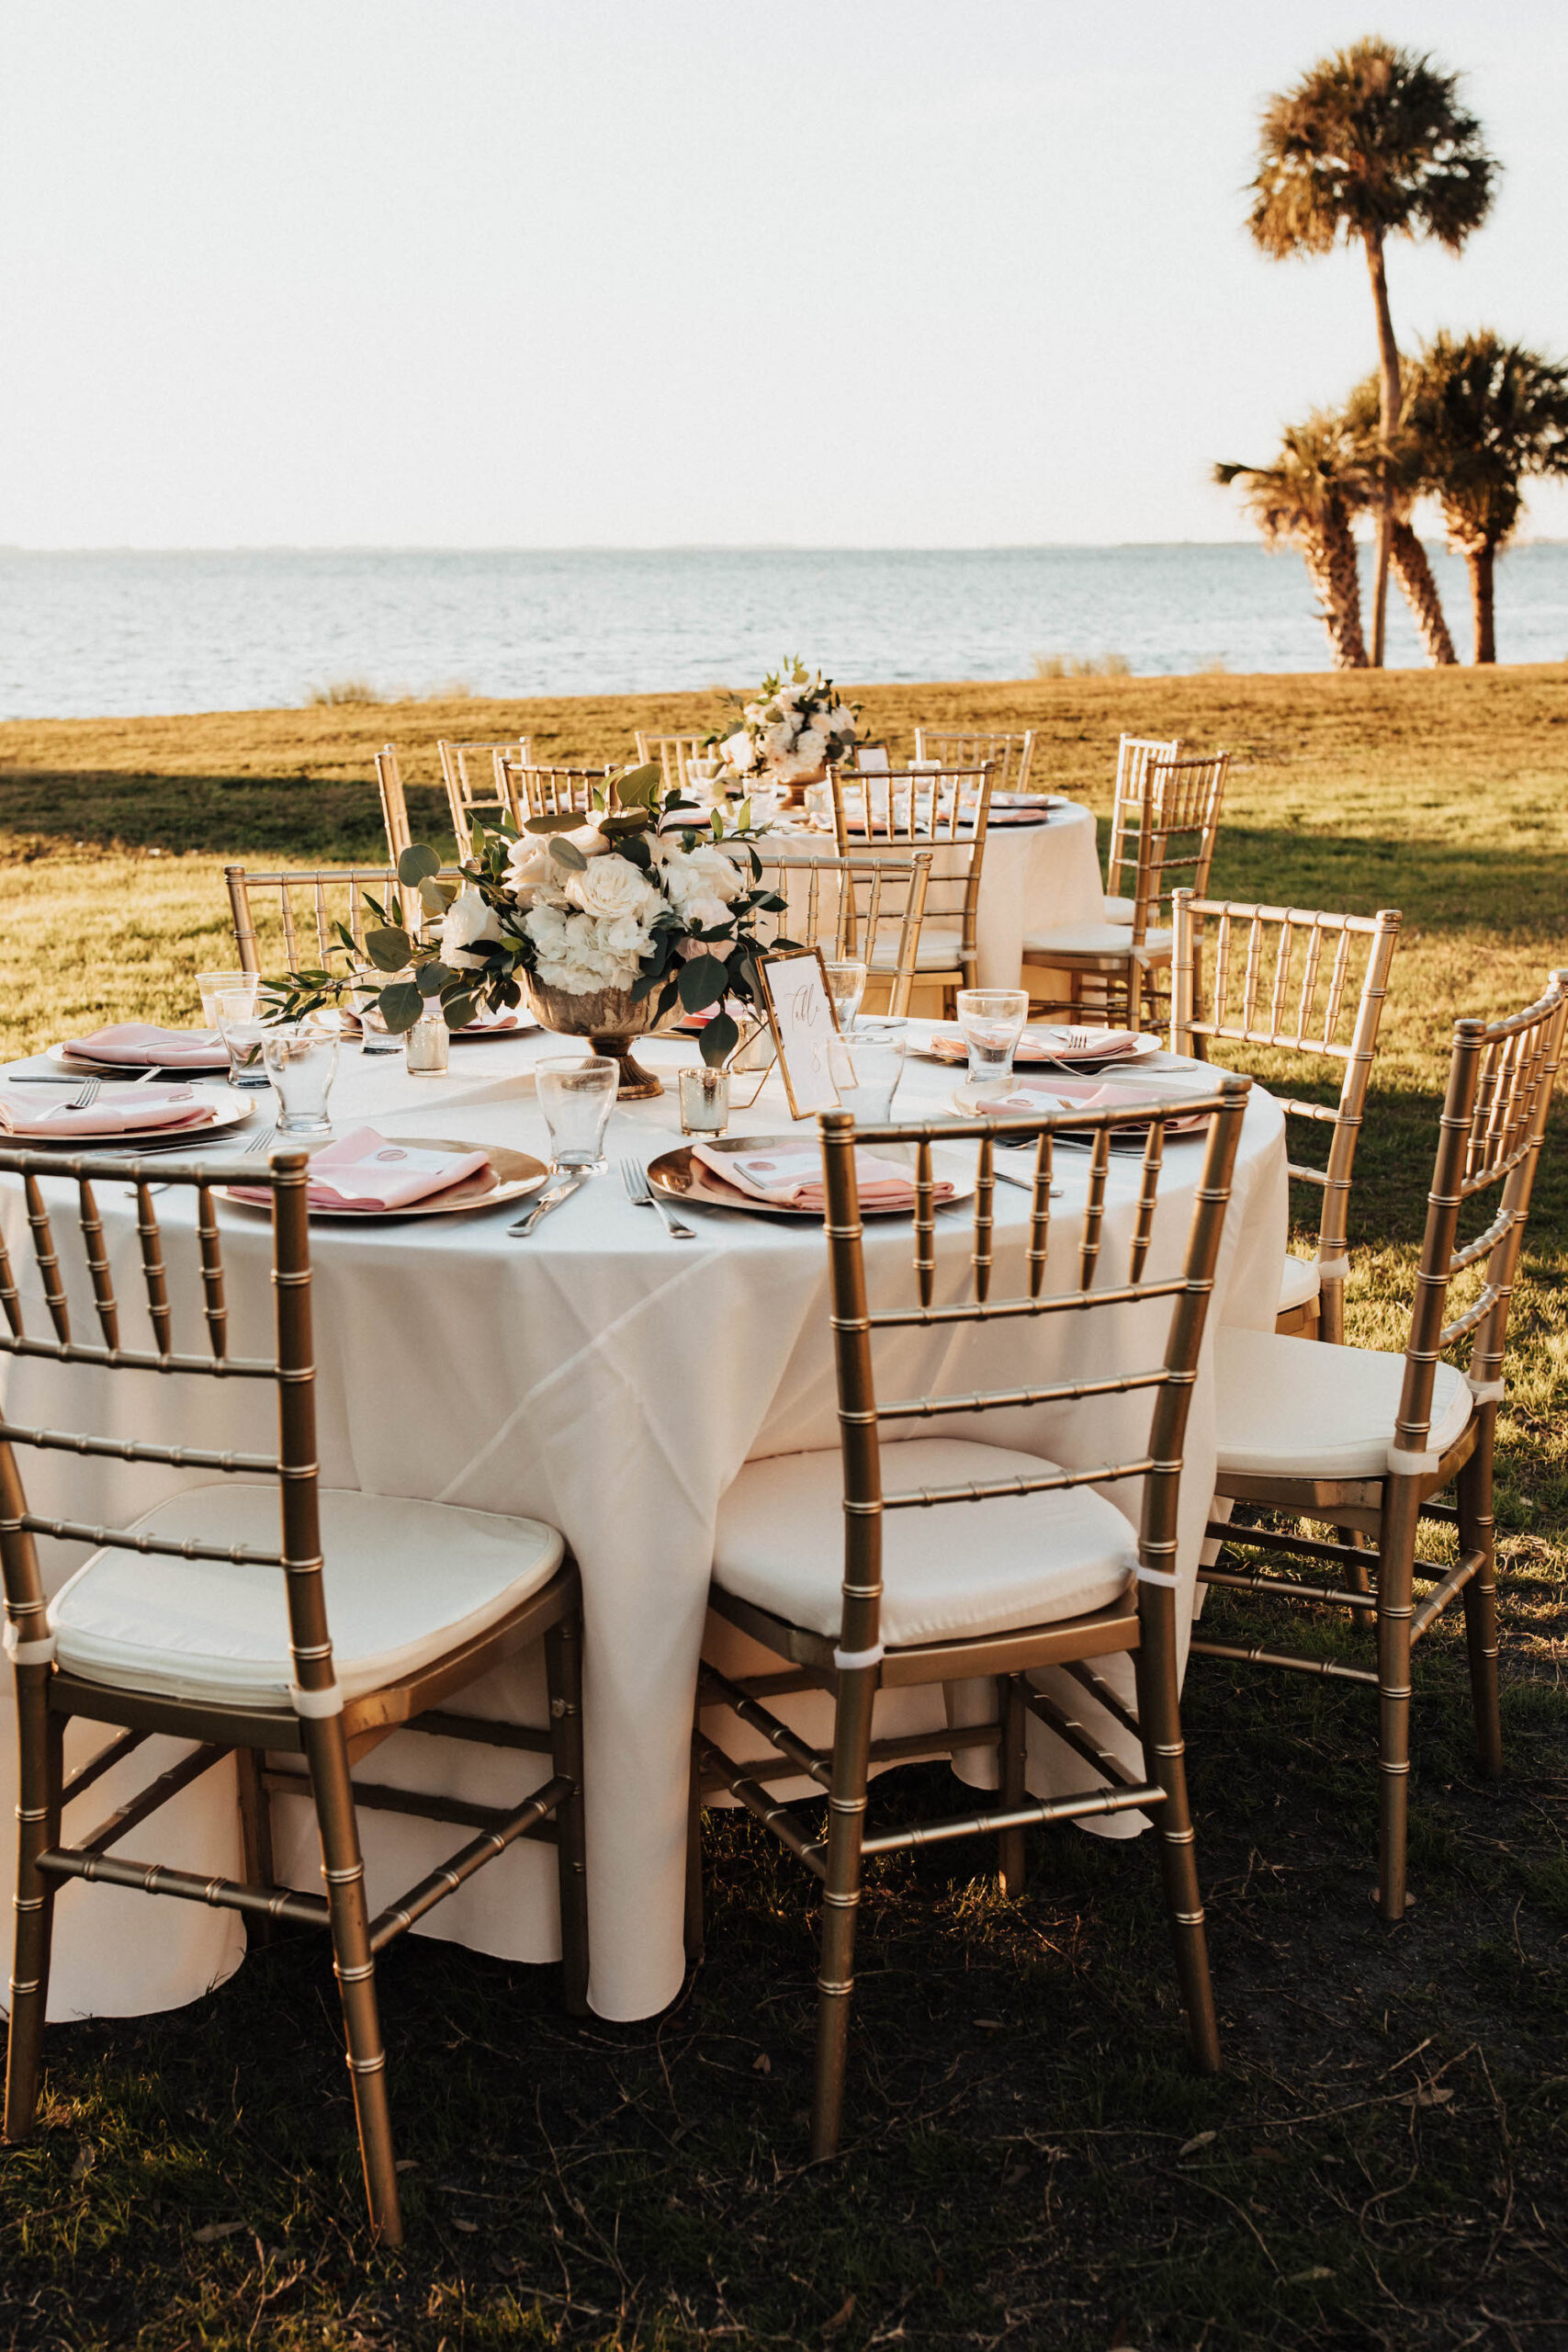 Gold Chiavari Chairs with White Linen Tables and Floral Centerpieces | Romantic Waterfront Outdoor Garden Wedding Reception